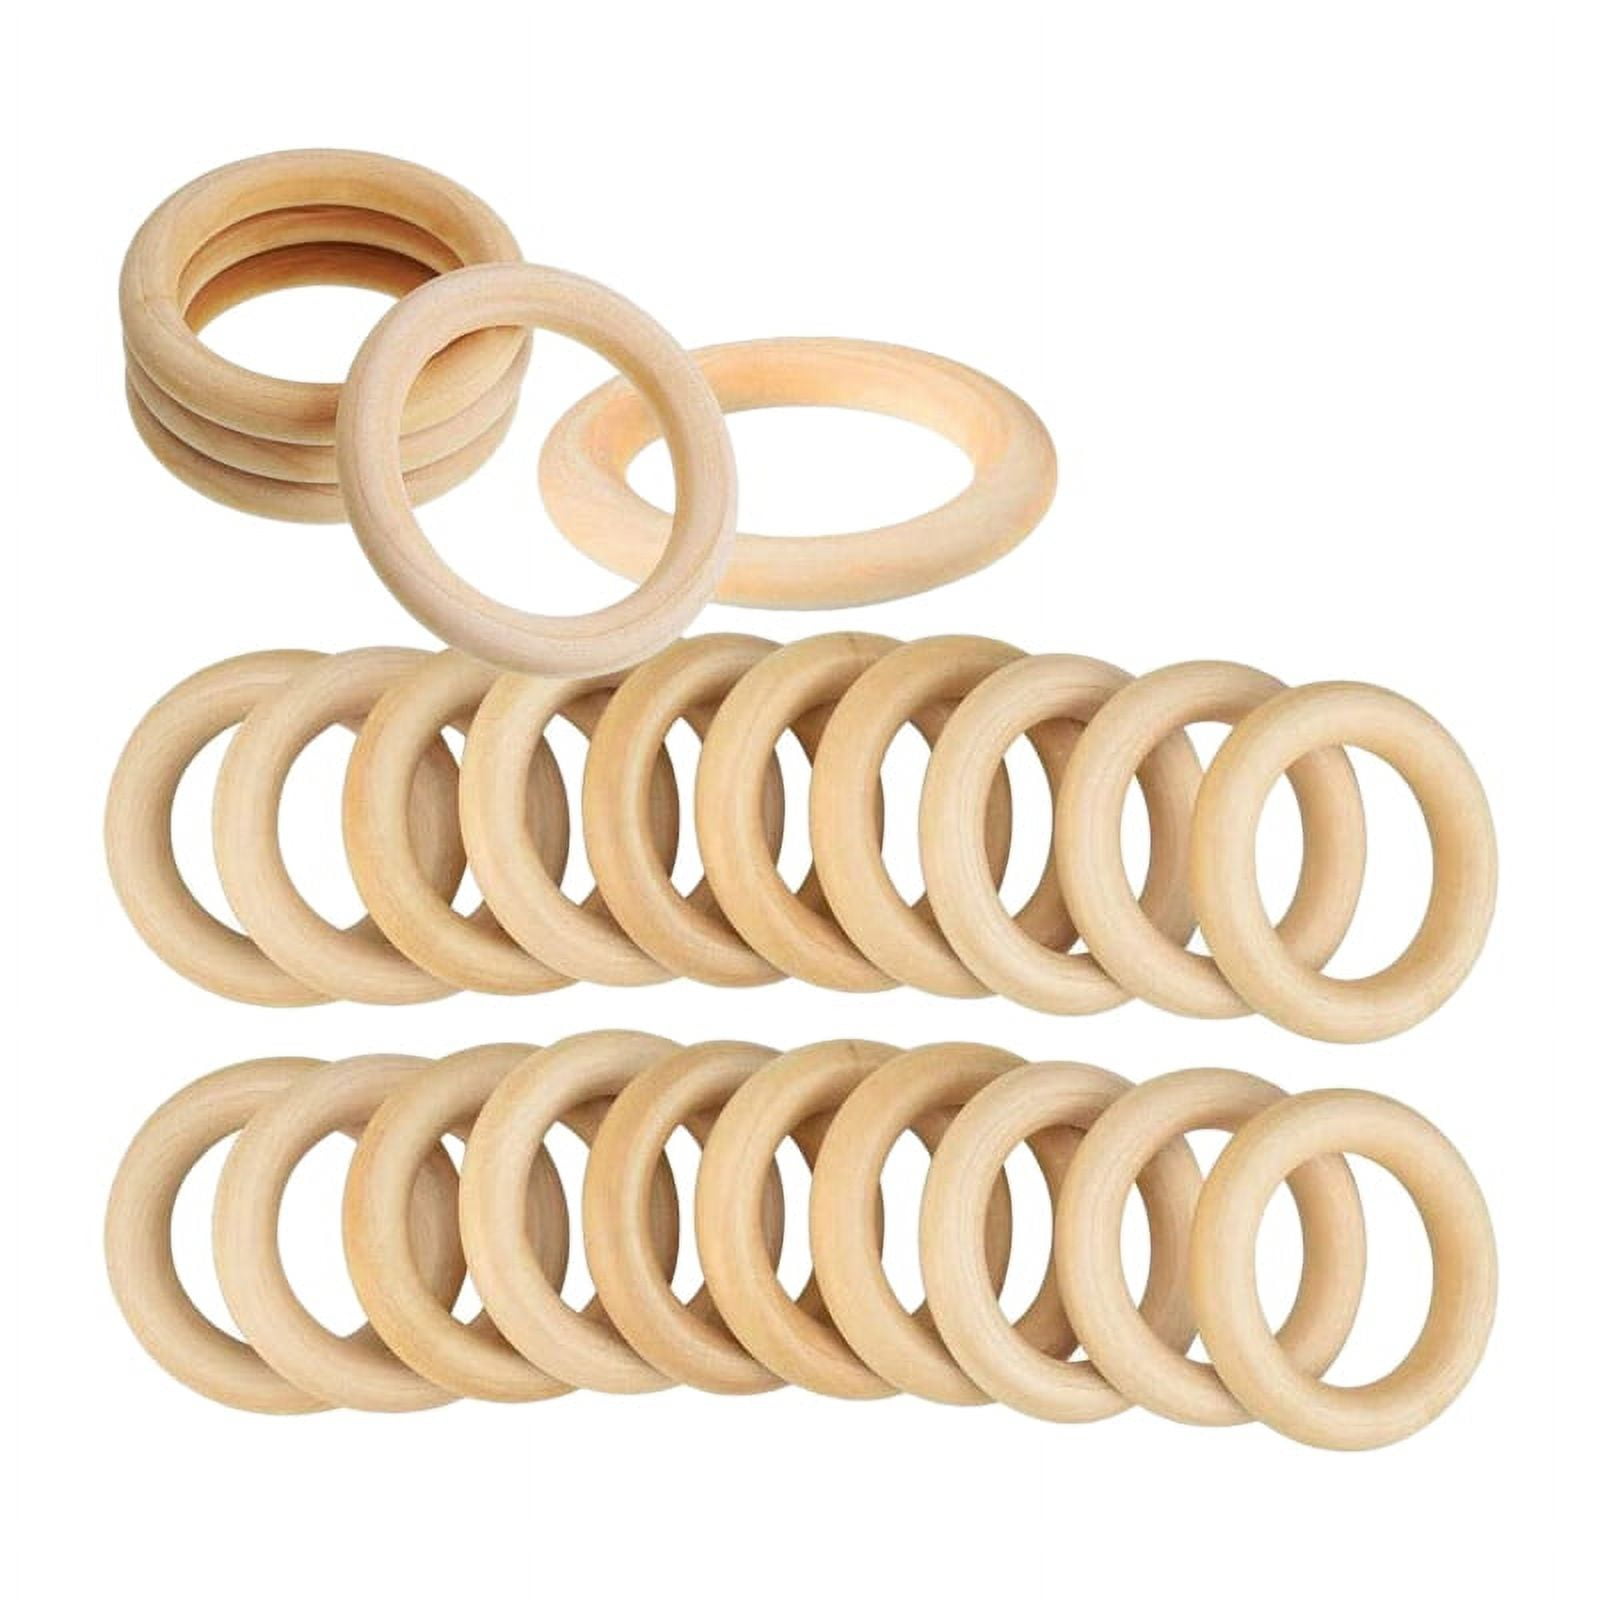 40mm/55mm/70mm Wooden Rings | Beech Wood Rings | Macrame Wooden Ring |  Smooth Finished Natural Wood Ring | Macrame Supplies | Craft Supplies